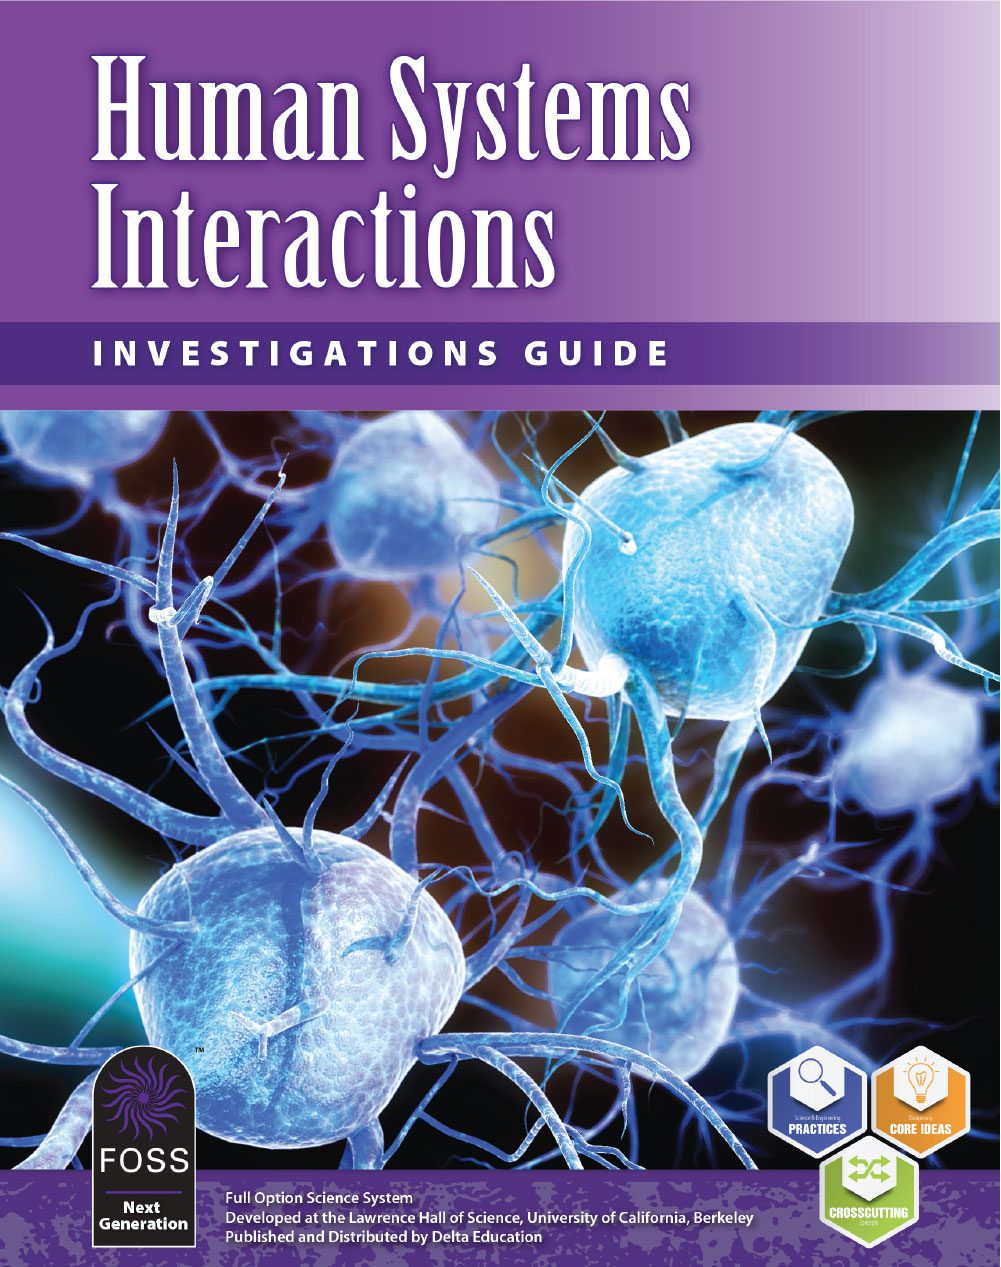 Human Systems Interactions Investigations Guide